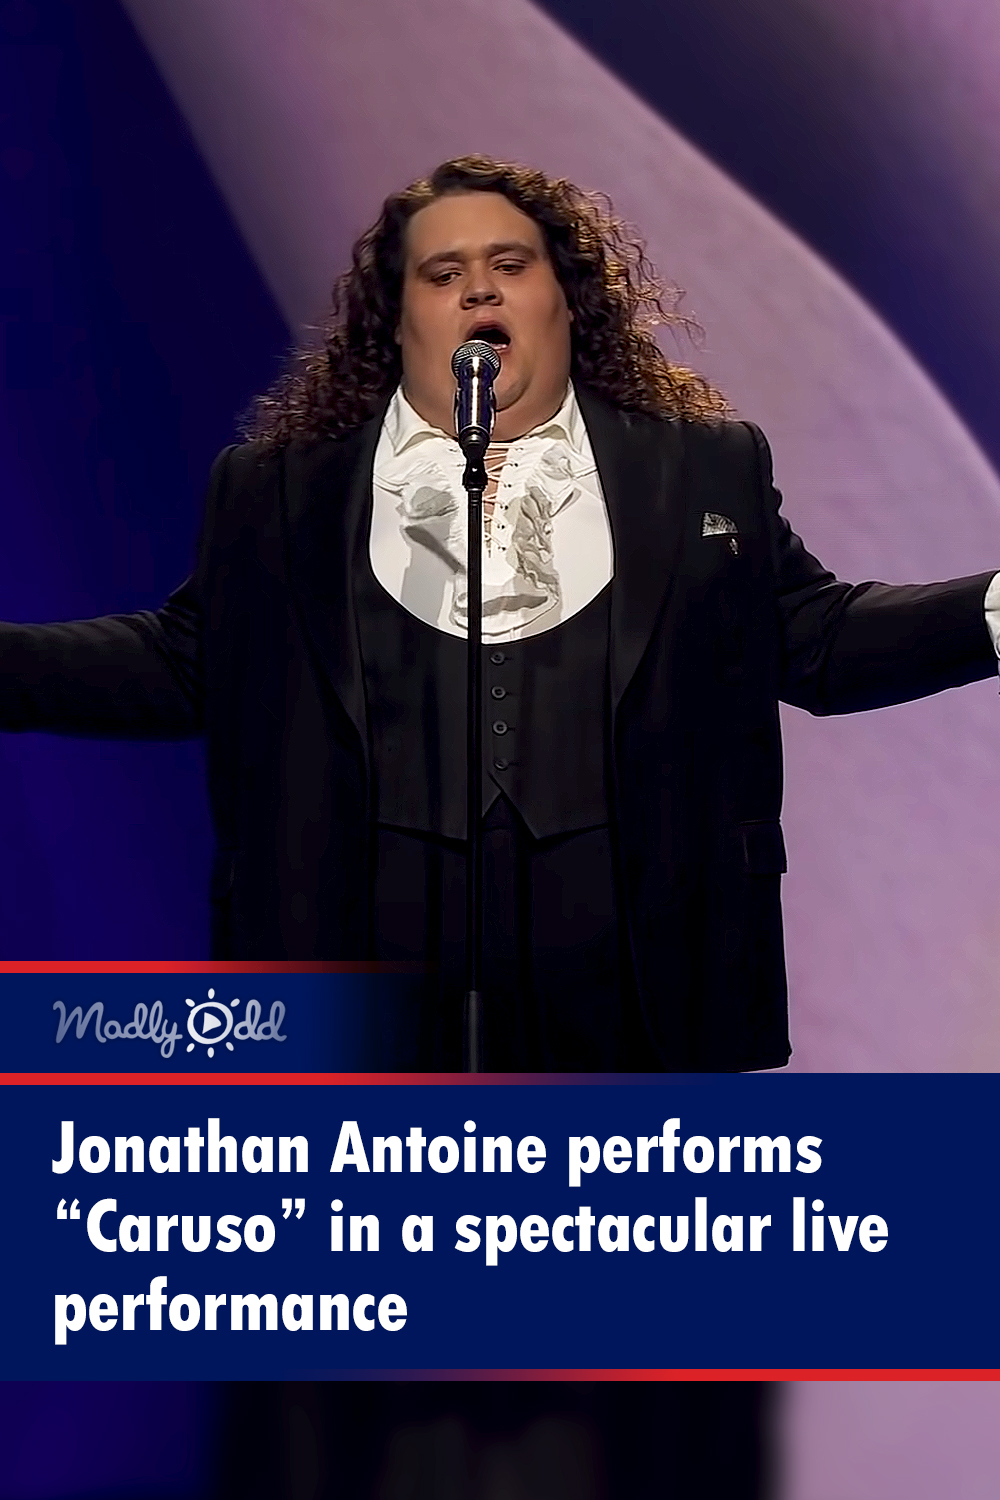 Jonathan Antoine performs “Caruso” in a spectacular live performance